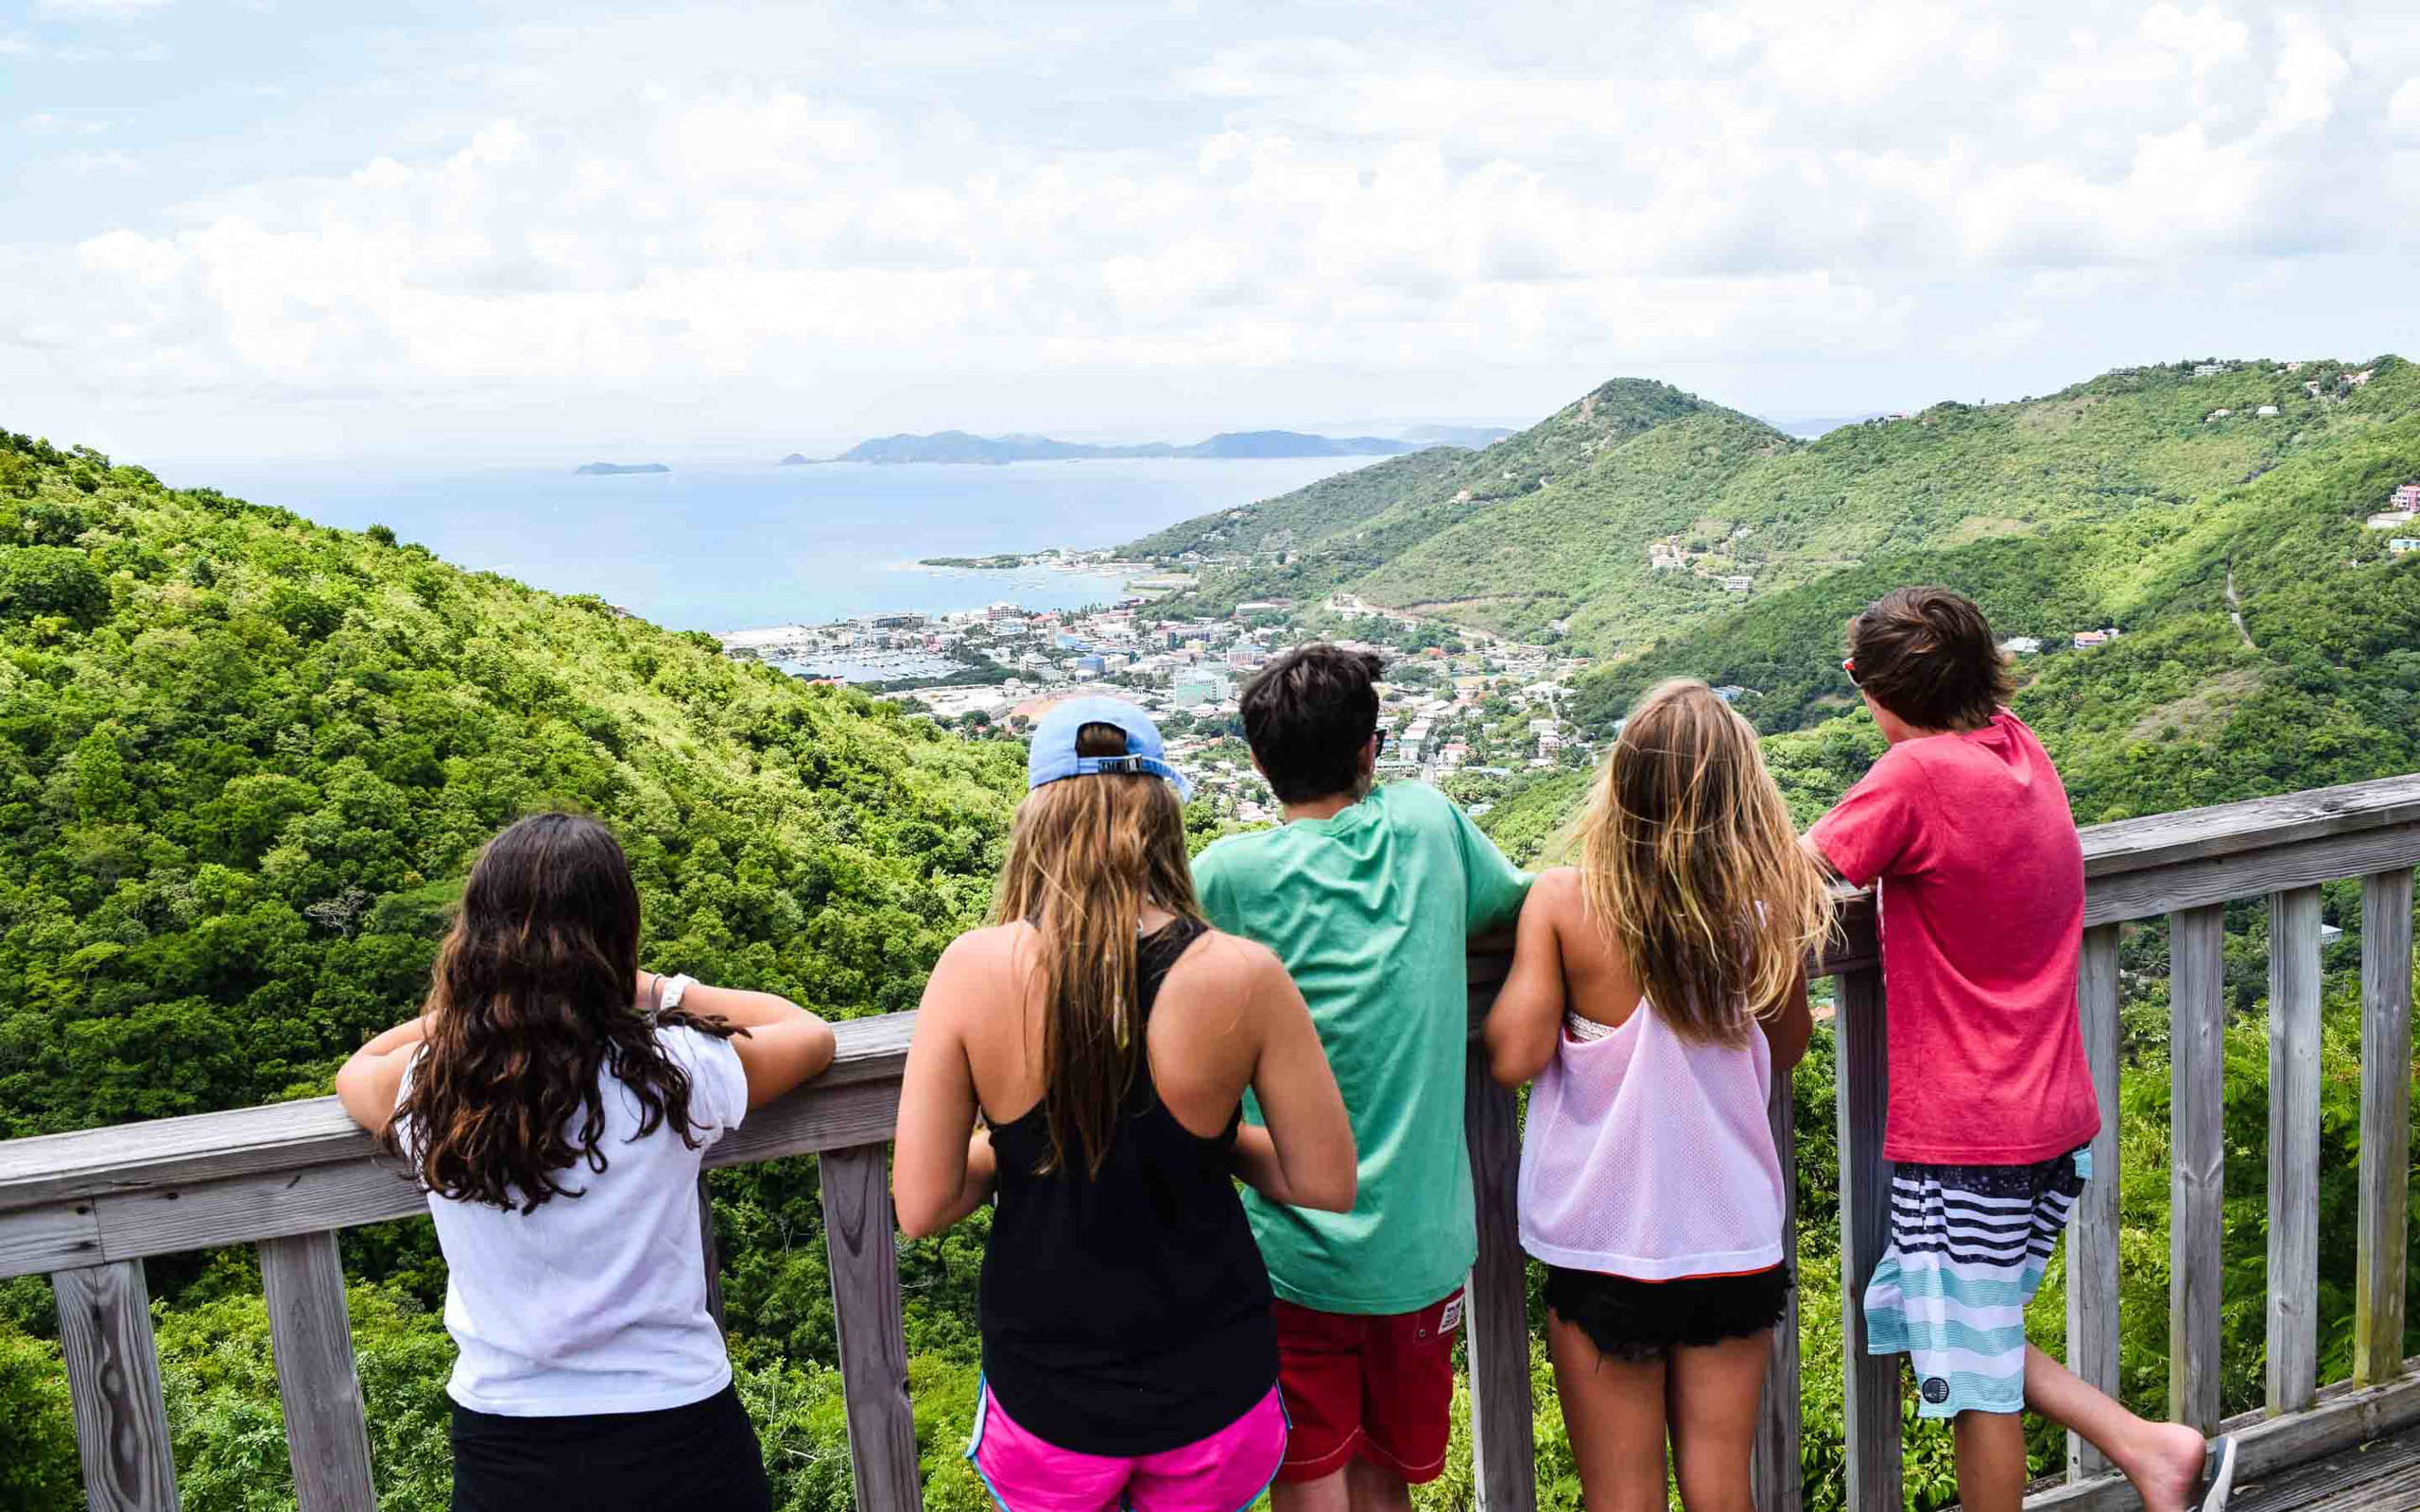 A group of people standing on a railing overlooking a mountain.